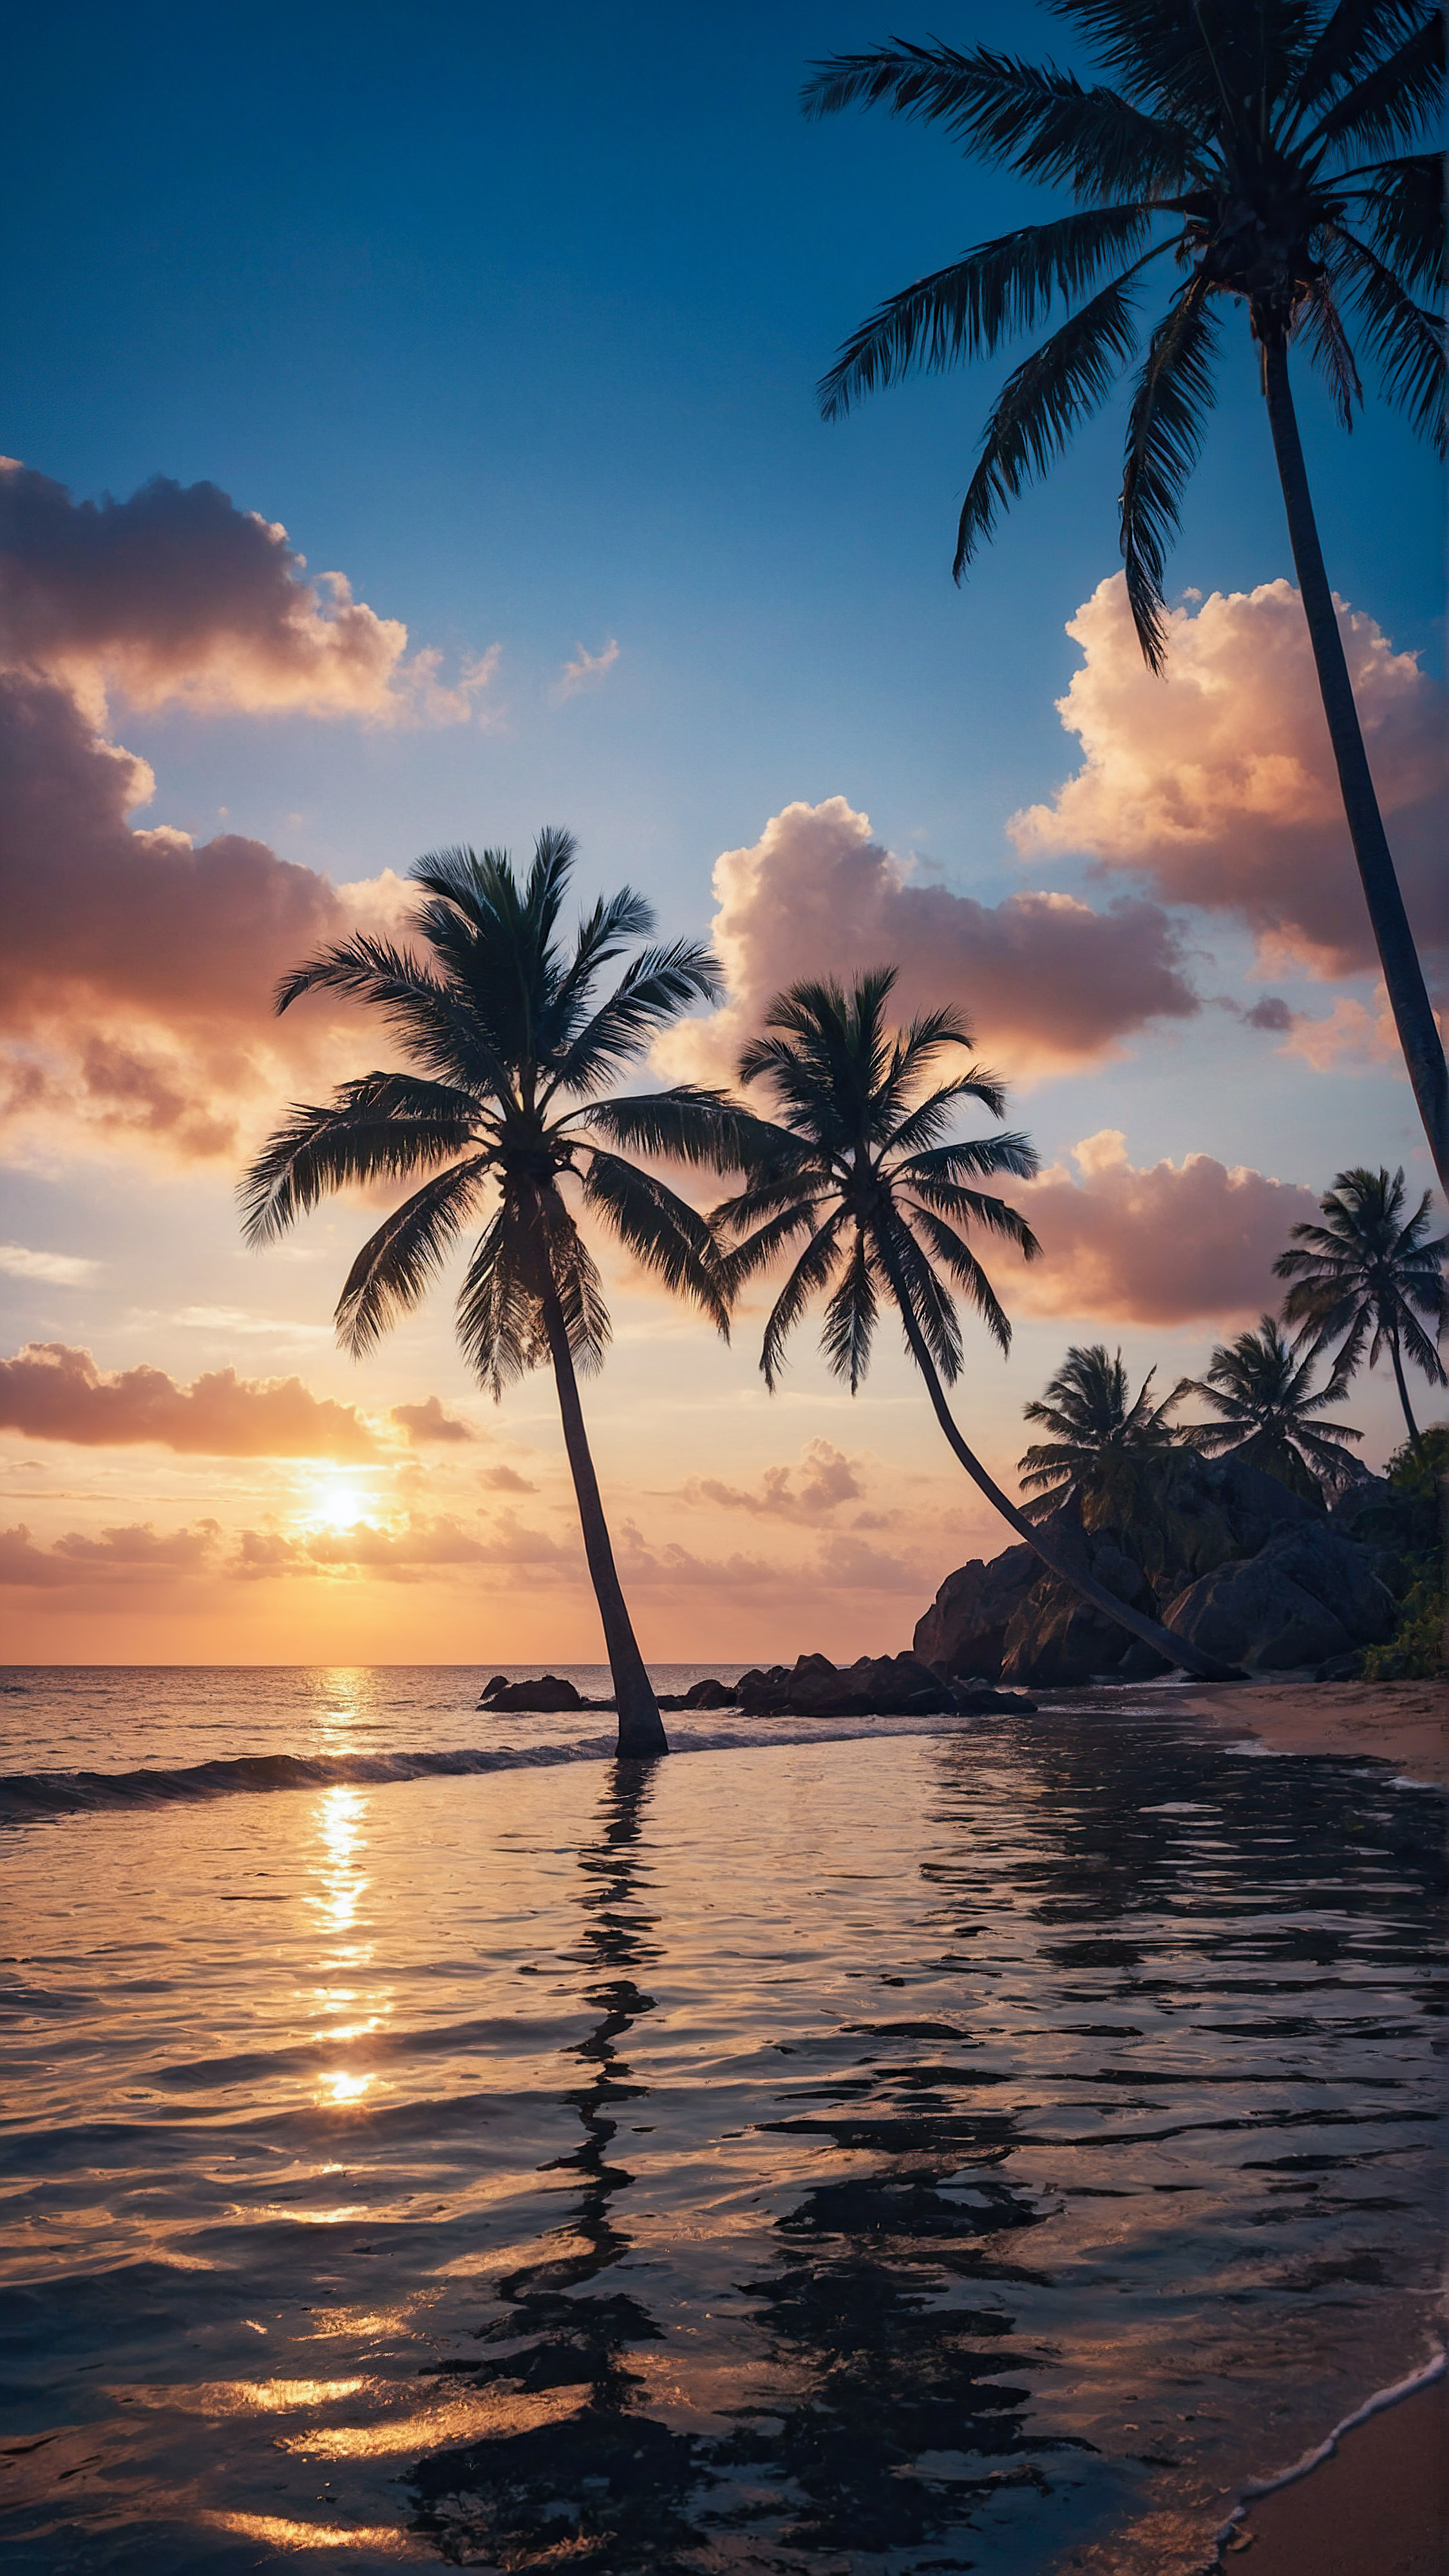 Enjoy the beauty and style of our iPhone wallpaper featuring a serene sunset at a tropical beach, where the silhouette of palm trees is highlighted against the warm hues of the sky reflecting on the calm waters.